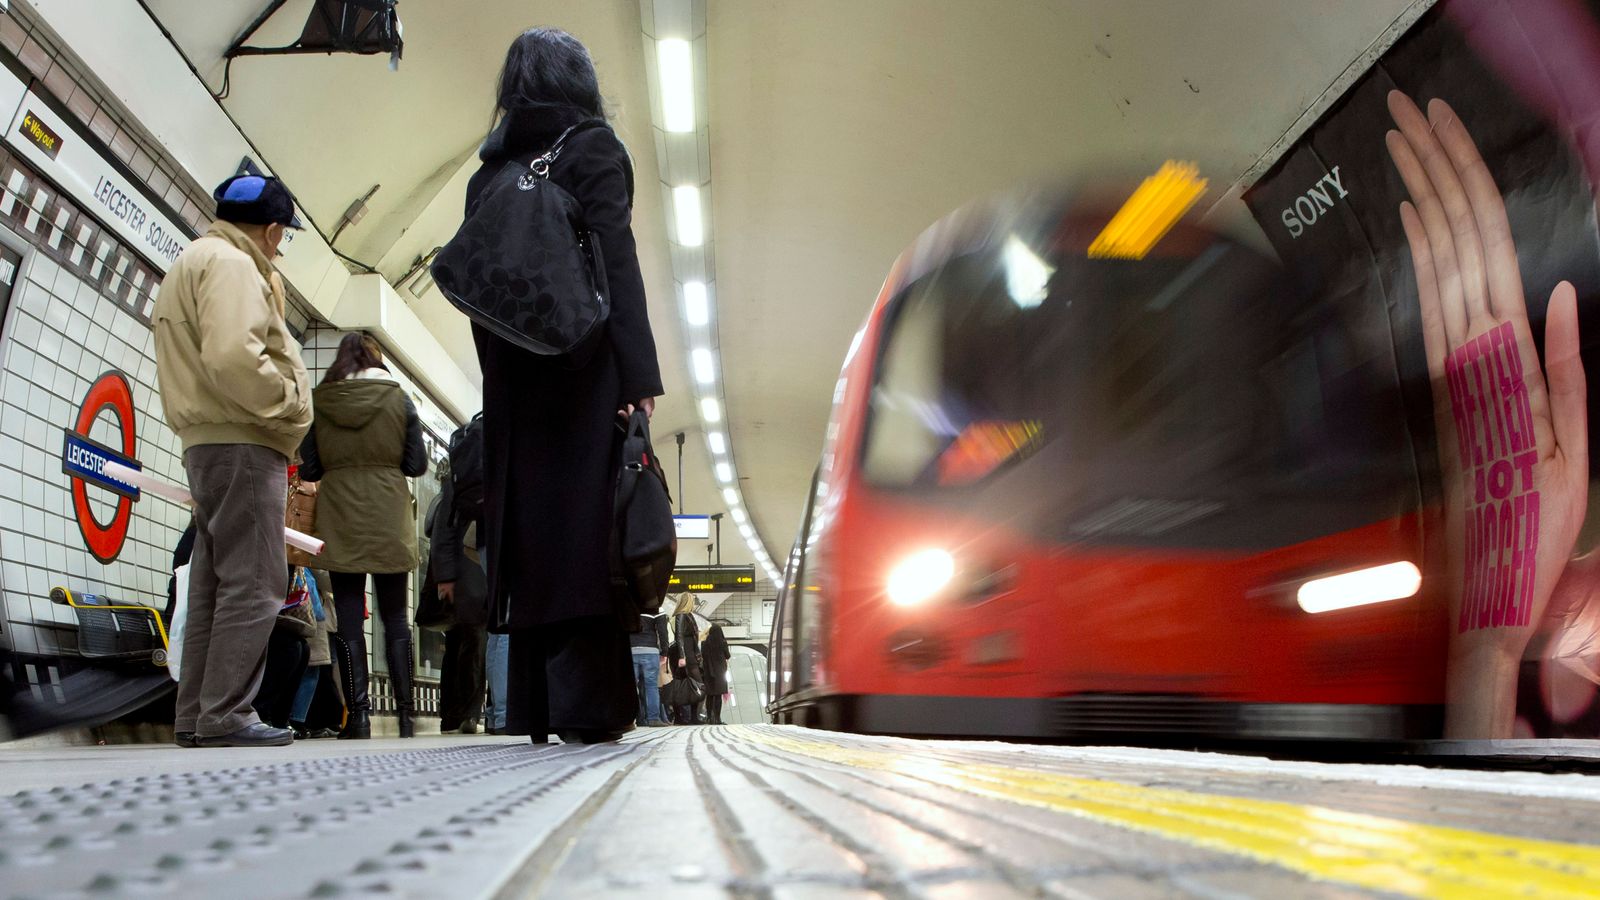 Transport for London gets £250m funding boost - with new trains set to be introduced